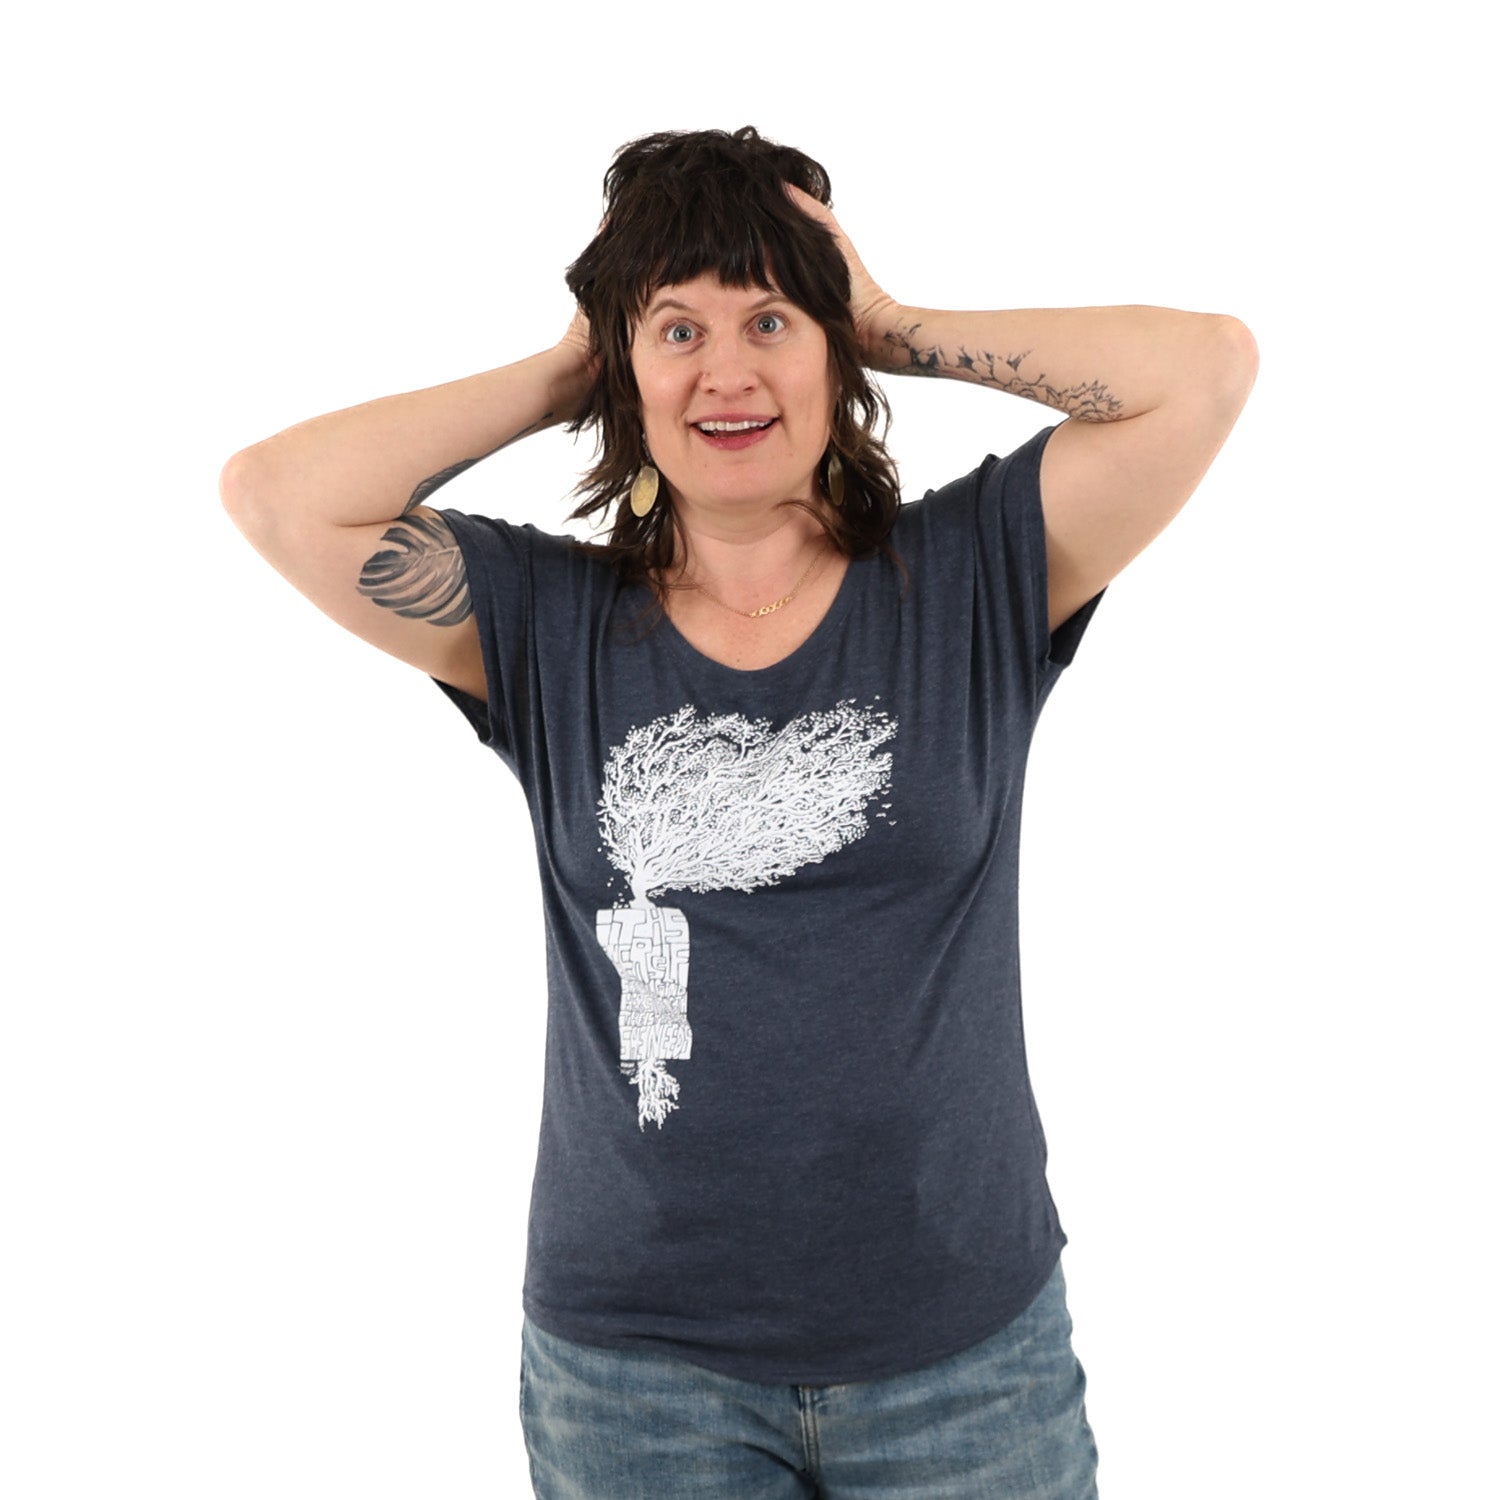  Woman wearing loose fitted blue t shirt with white print